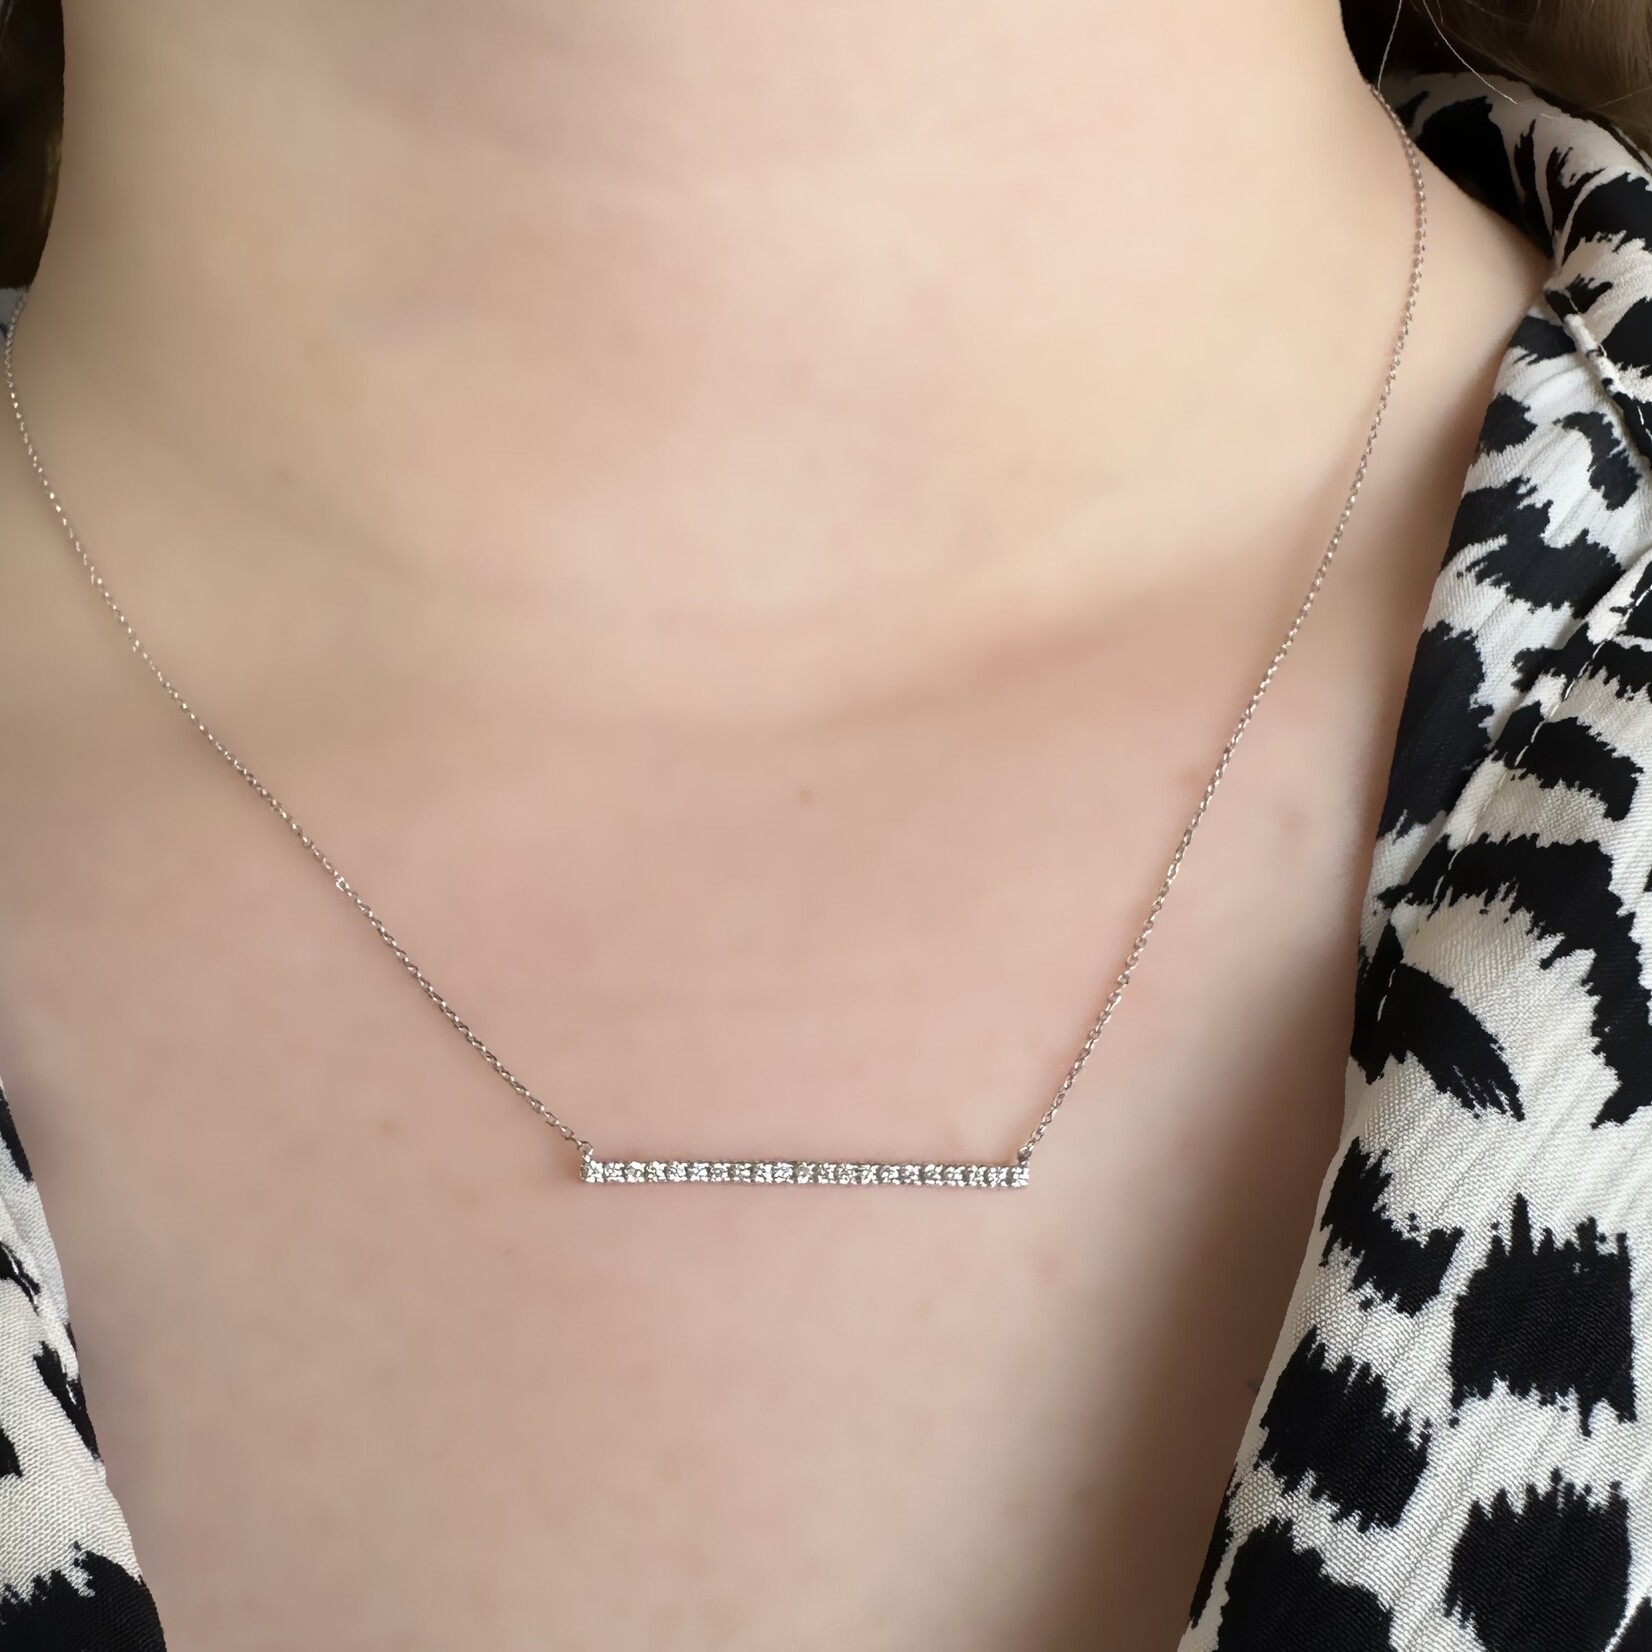 14k White Gold Diamond Bar Necklace with Chain